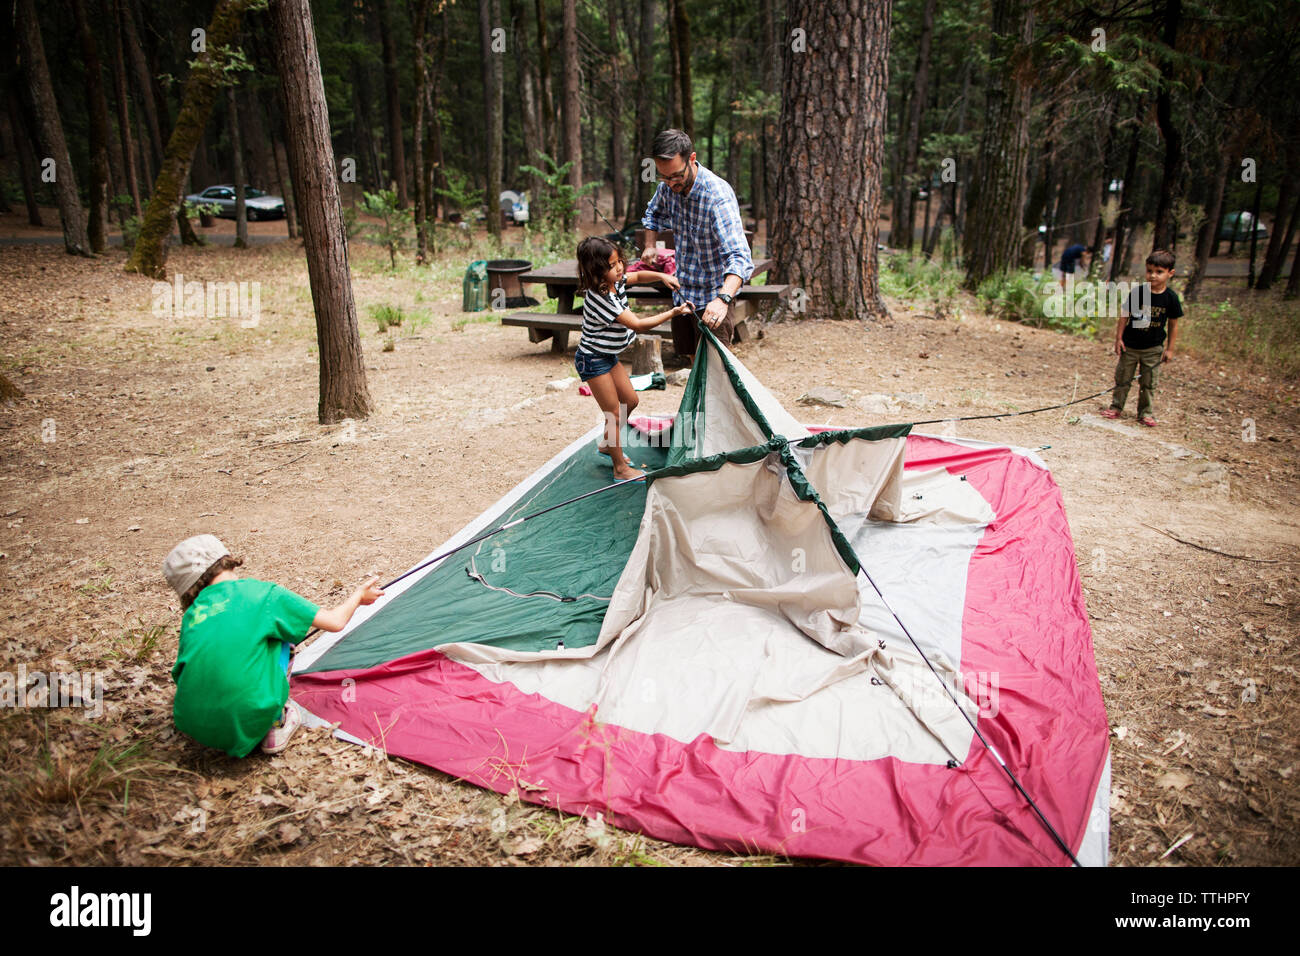 Family setting tent together in forest Stock Photo